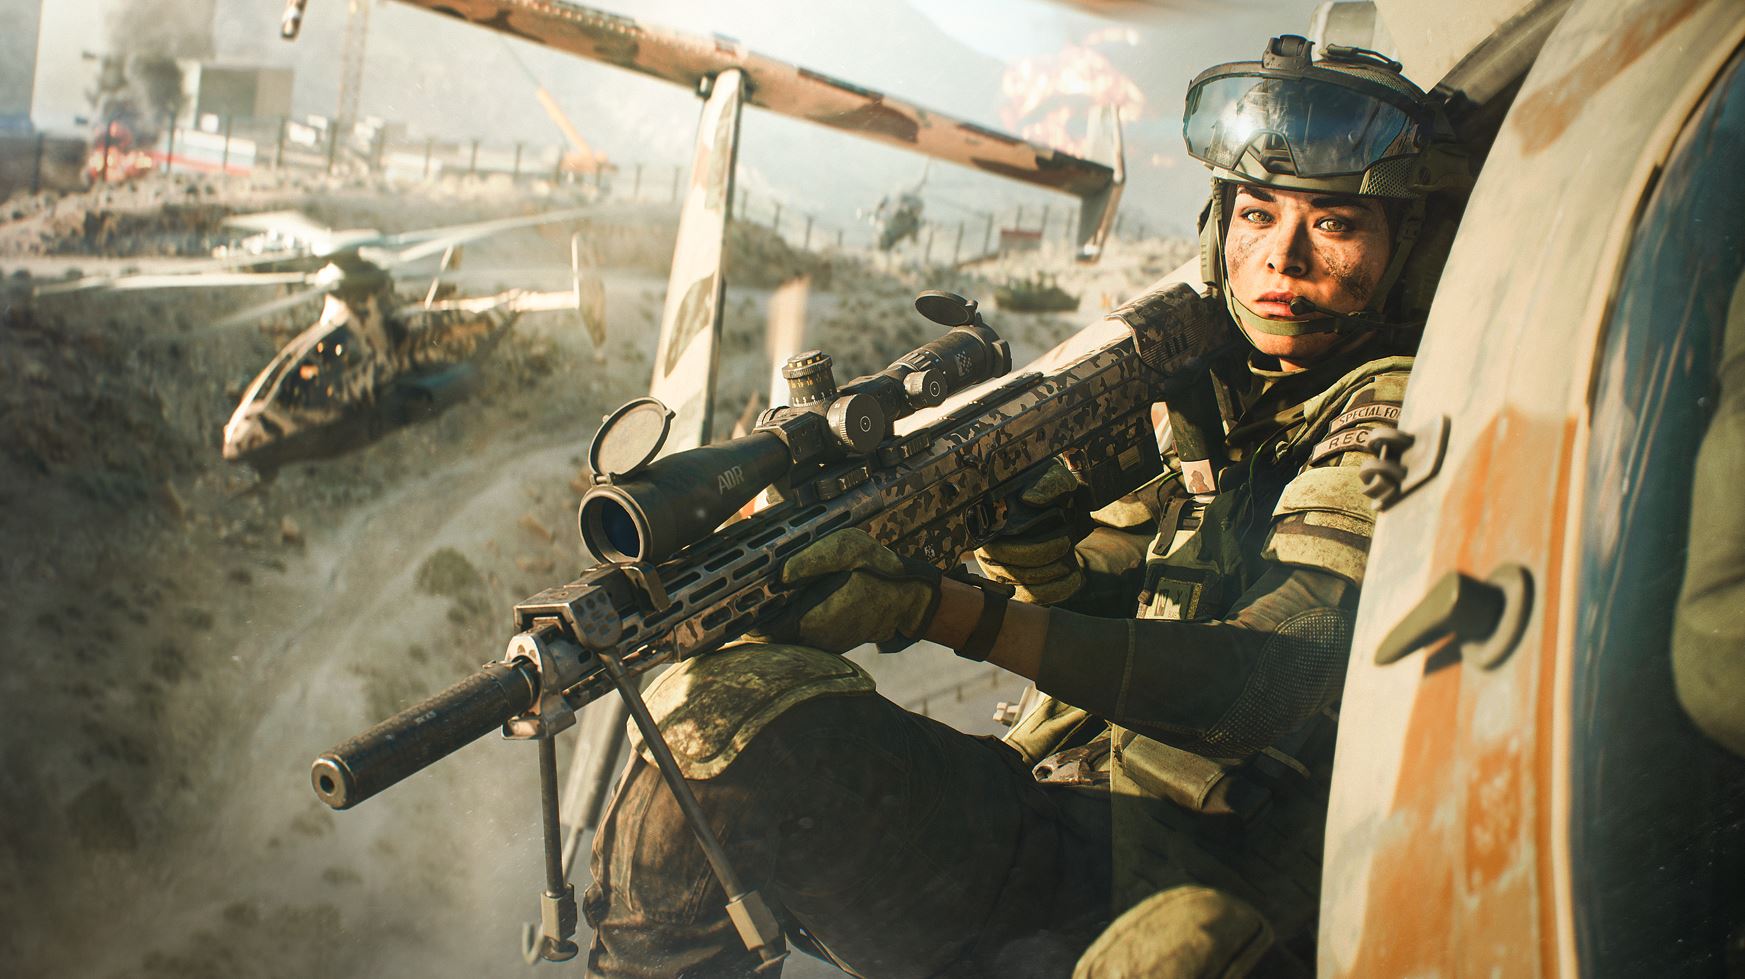 Battlefield 2042 cross-play and cross-progression plans have been